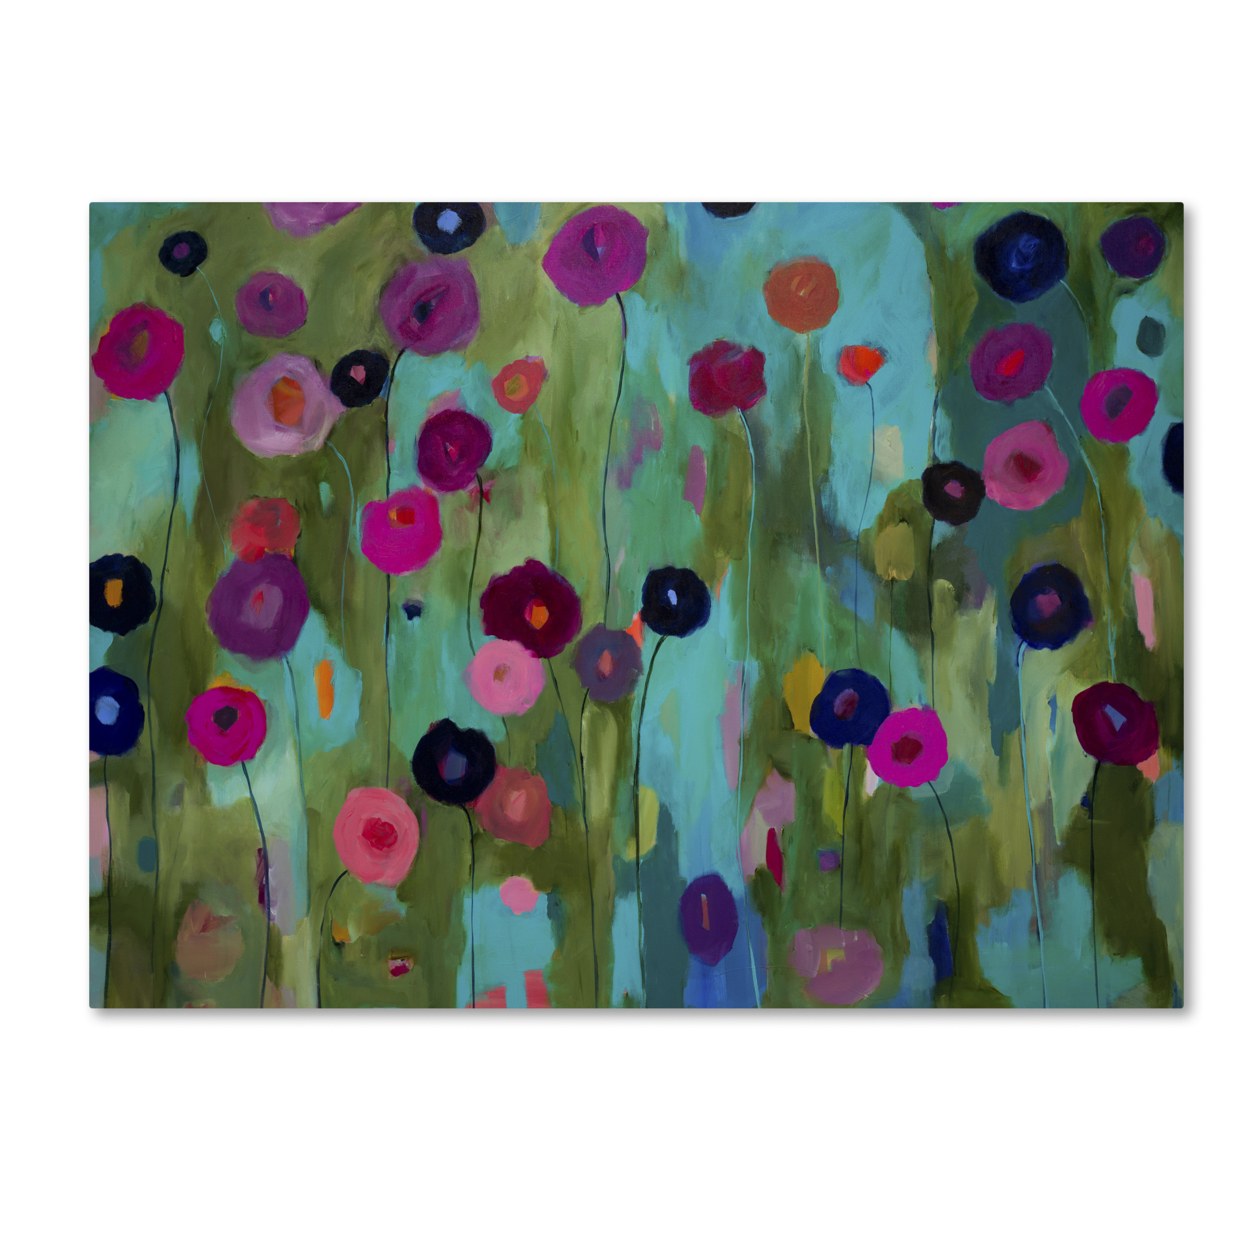 Carrie Schmitt 'Time To Bloom' Canvas Wall Art 35 X 47 Inches